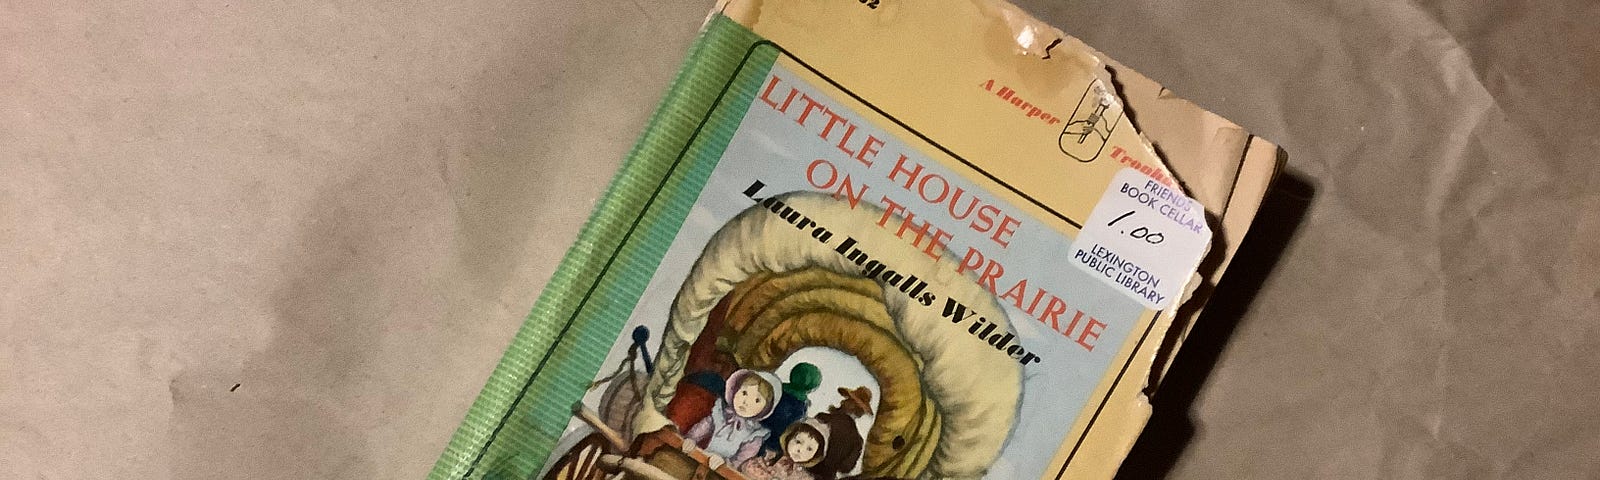 battered library discard of Laura Ingall’s Wilder’s Little House on the Prairie, a novel that brings American history and pioneer spirit to vivid life